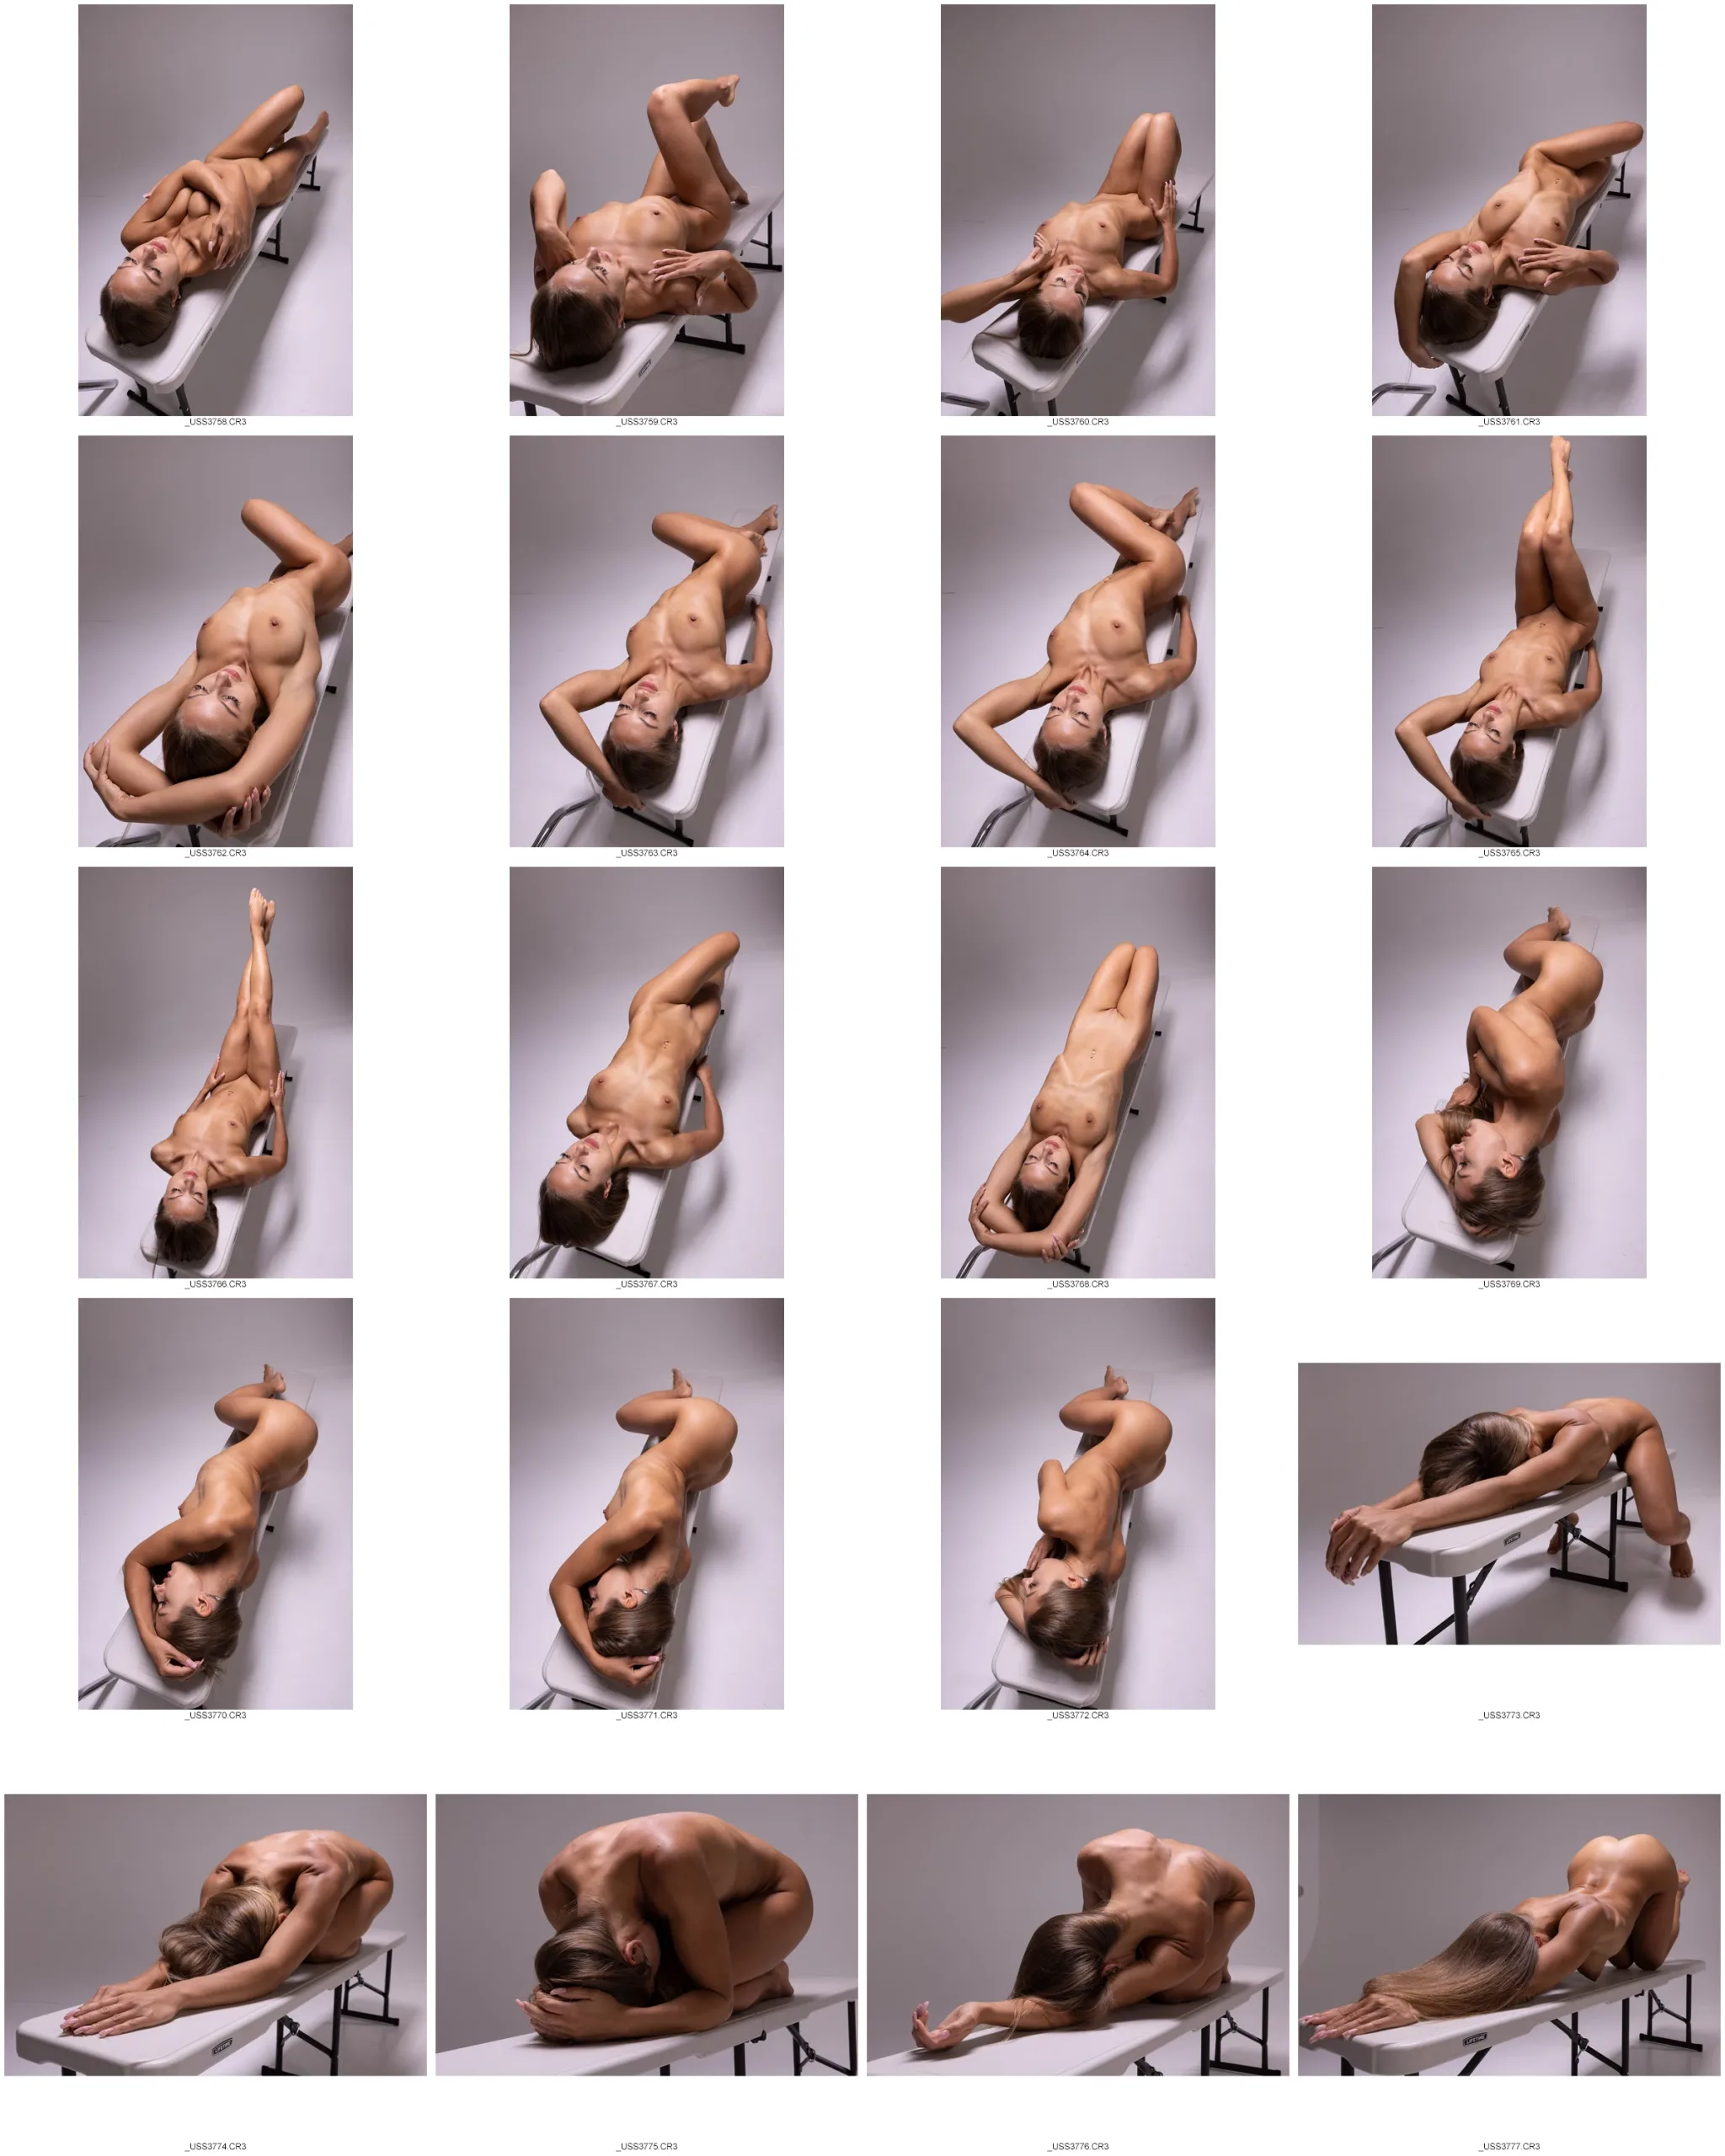 600+ Female Anatomy Reference Images